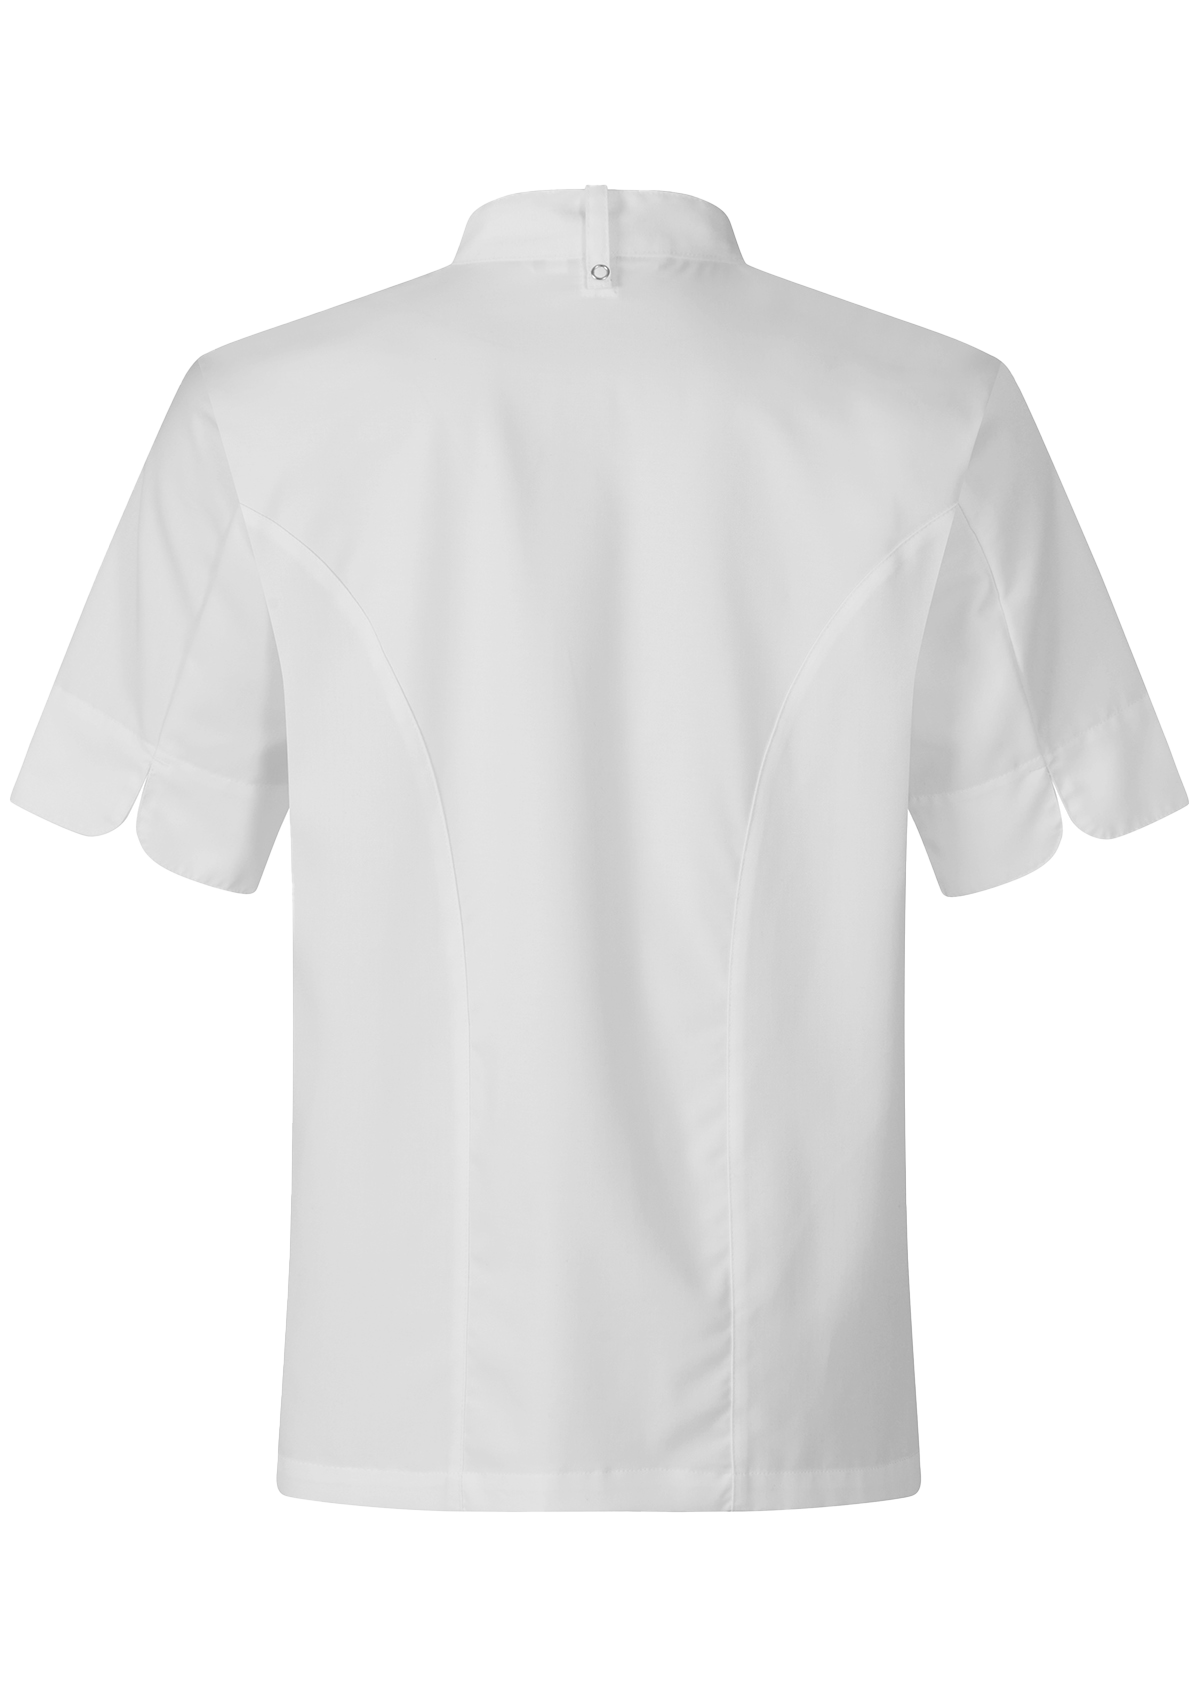 Chef Jacket With Stretch Panels Short-Sleeves Unisex